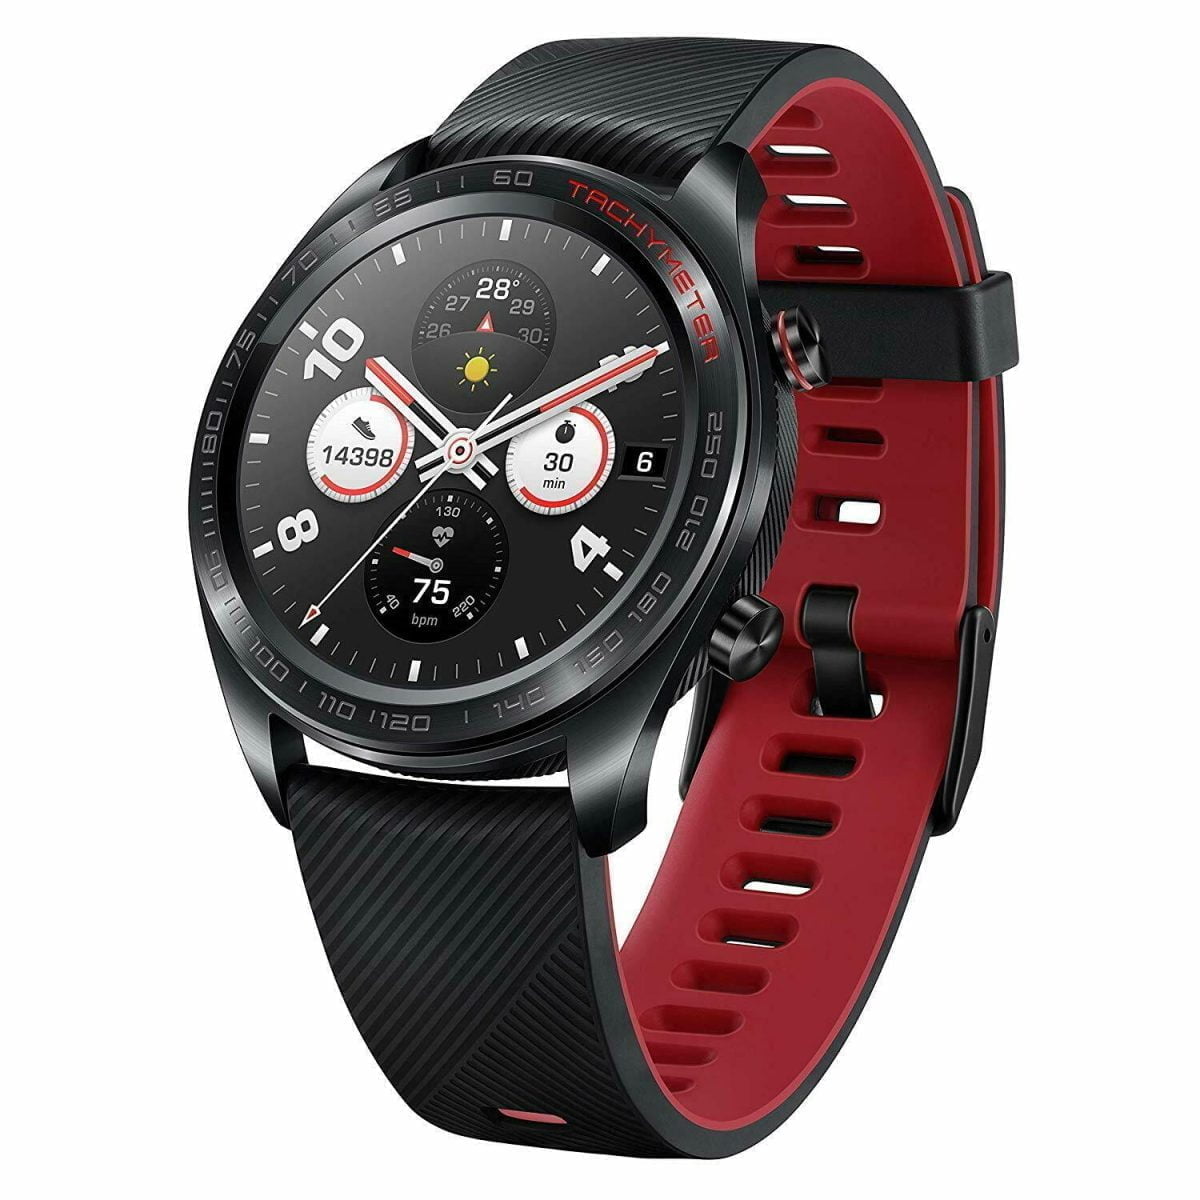 S L1600 7 Huawei &Lt;P Style=&Quot;Font-Weight: 400;&Quot;&Gt;Carefully Crafted Using 316L Stainless Steel That Is Both Lightweight And Comfortable, The Honor Watch Is One Of The Slimmest Smart Watches On The Market. Polished To Perfection, Honor Watch Adopts Cnc Machining And The Latest Laser Engraving To Boost Durability For Daily Use. As A Finishing Touch, The Shell Of The Watch Is Made Of Biodegradable Nylon Plastic.&Lt;/P&Gt; Https://Www.youtube.com/Watch?V=Ek-Byxwvj2K Honor Watch Magic Smart Watch Amoled Gps Multi-Sport (Lava Black And Red Silicone Strap)